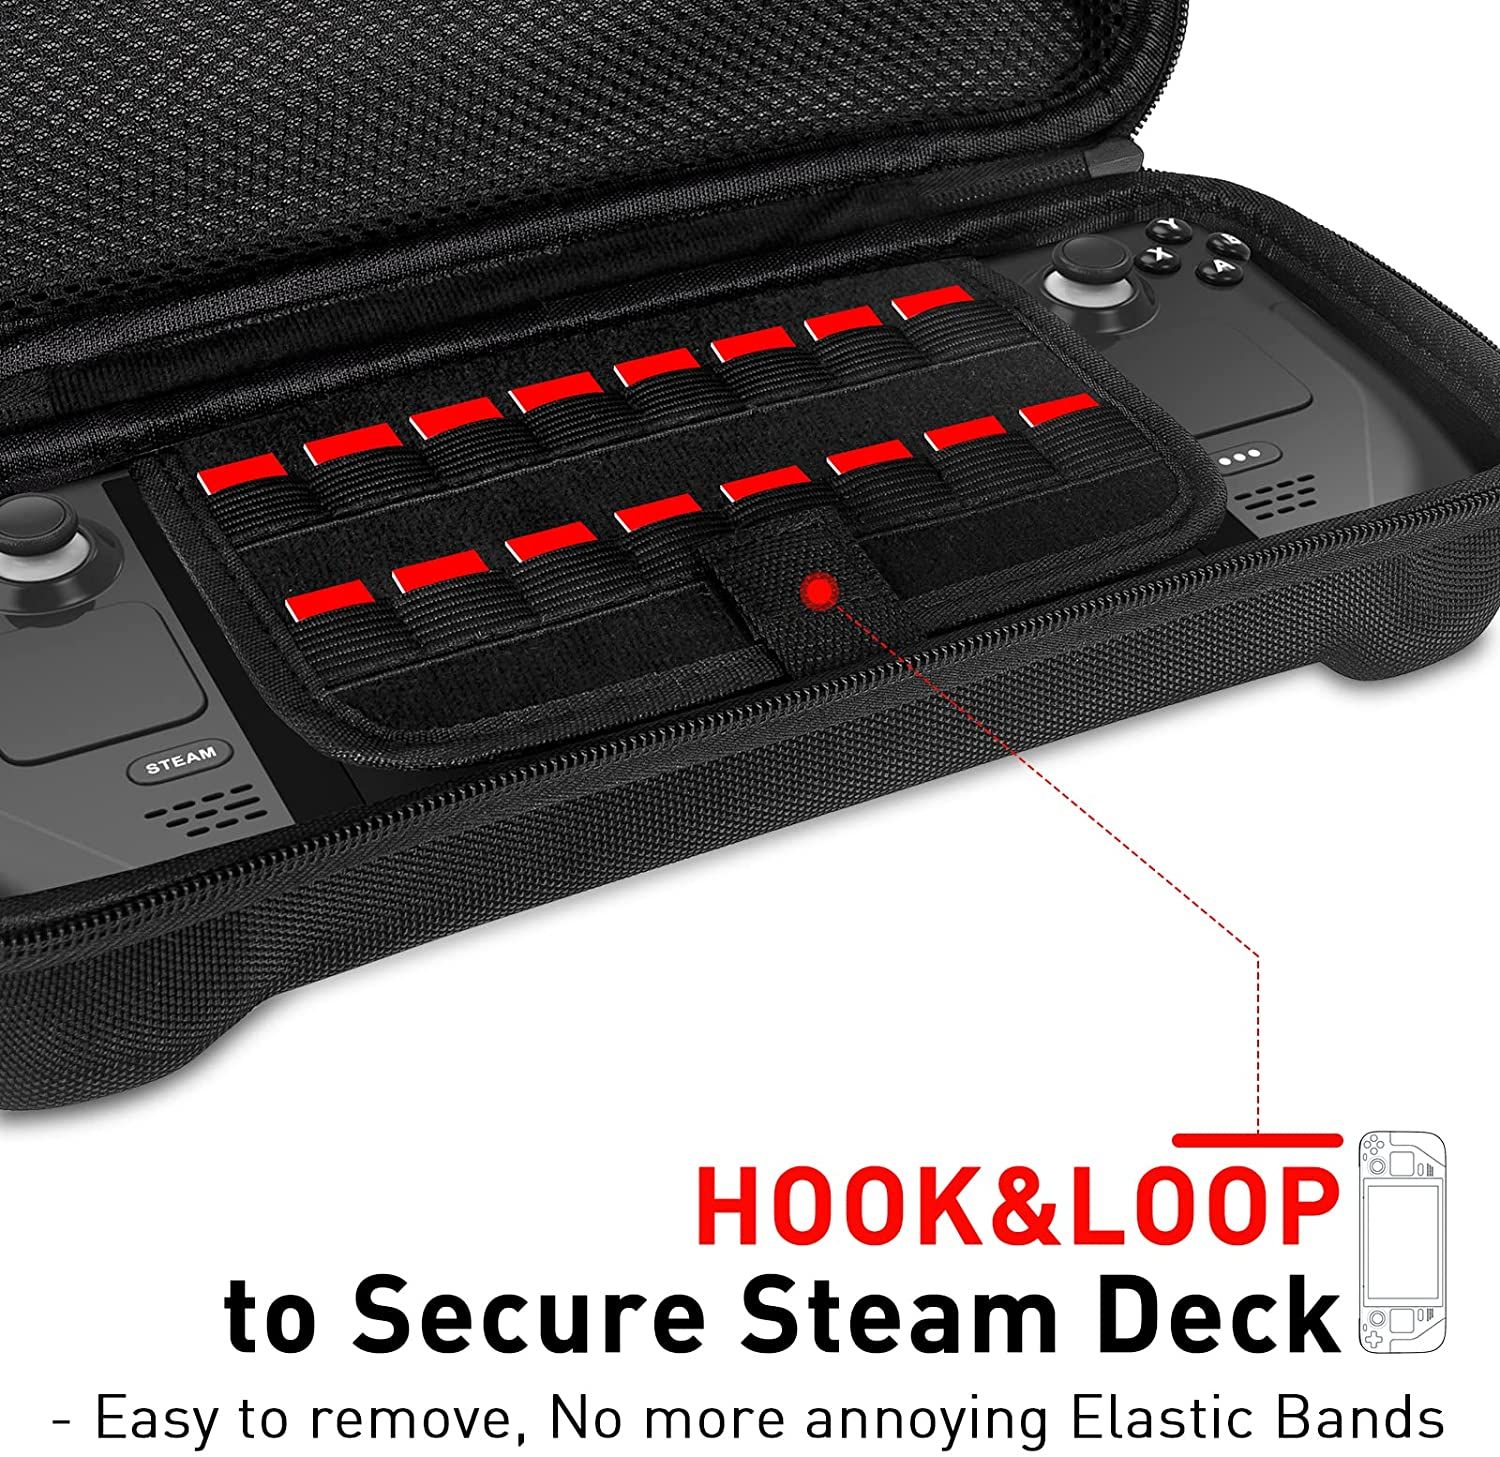 Essential Steam Deck Accessories You’ll Want to Consider